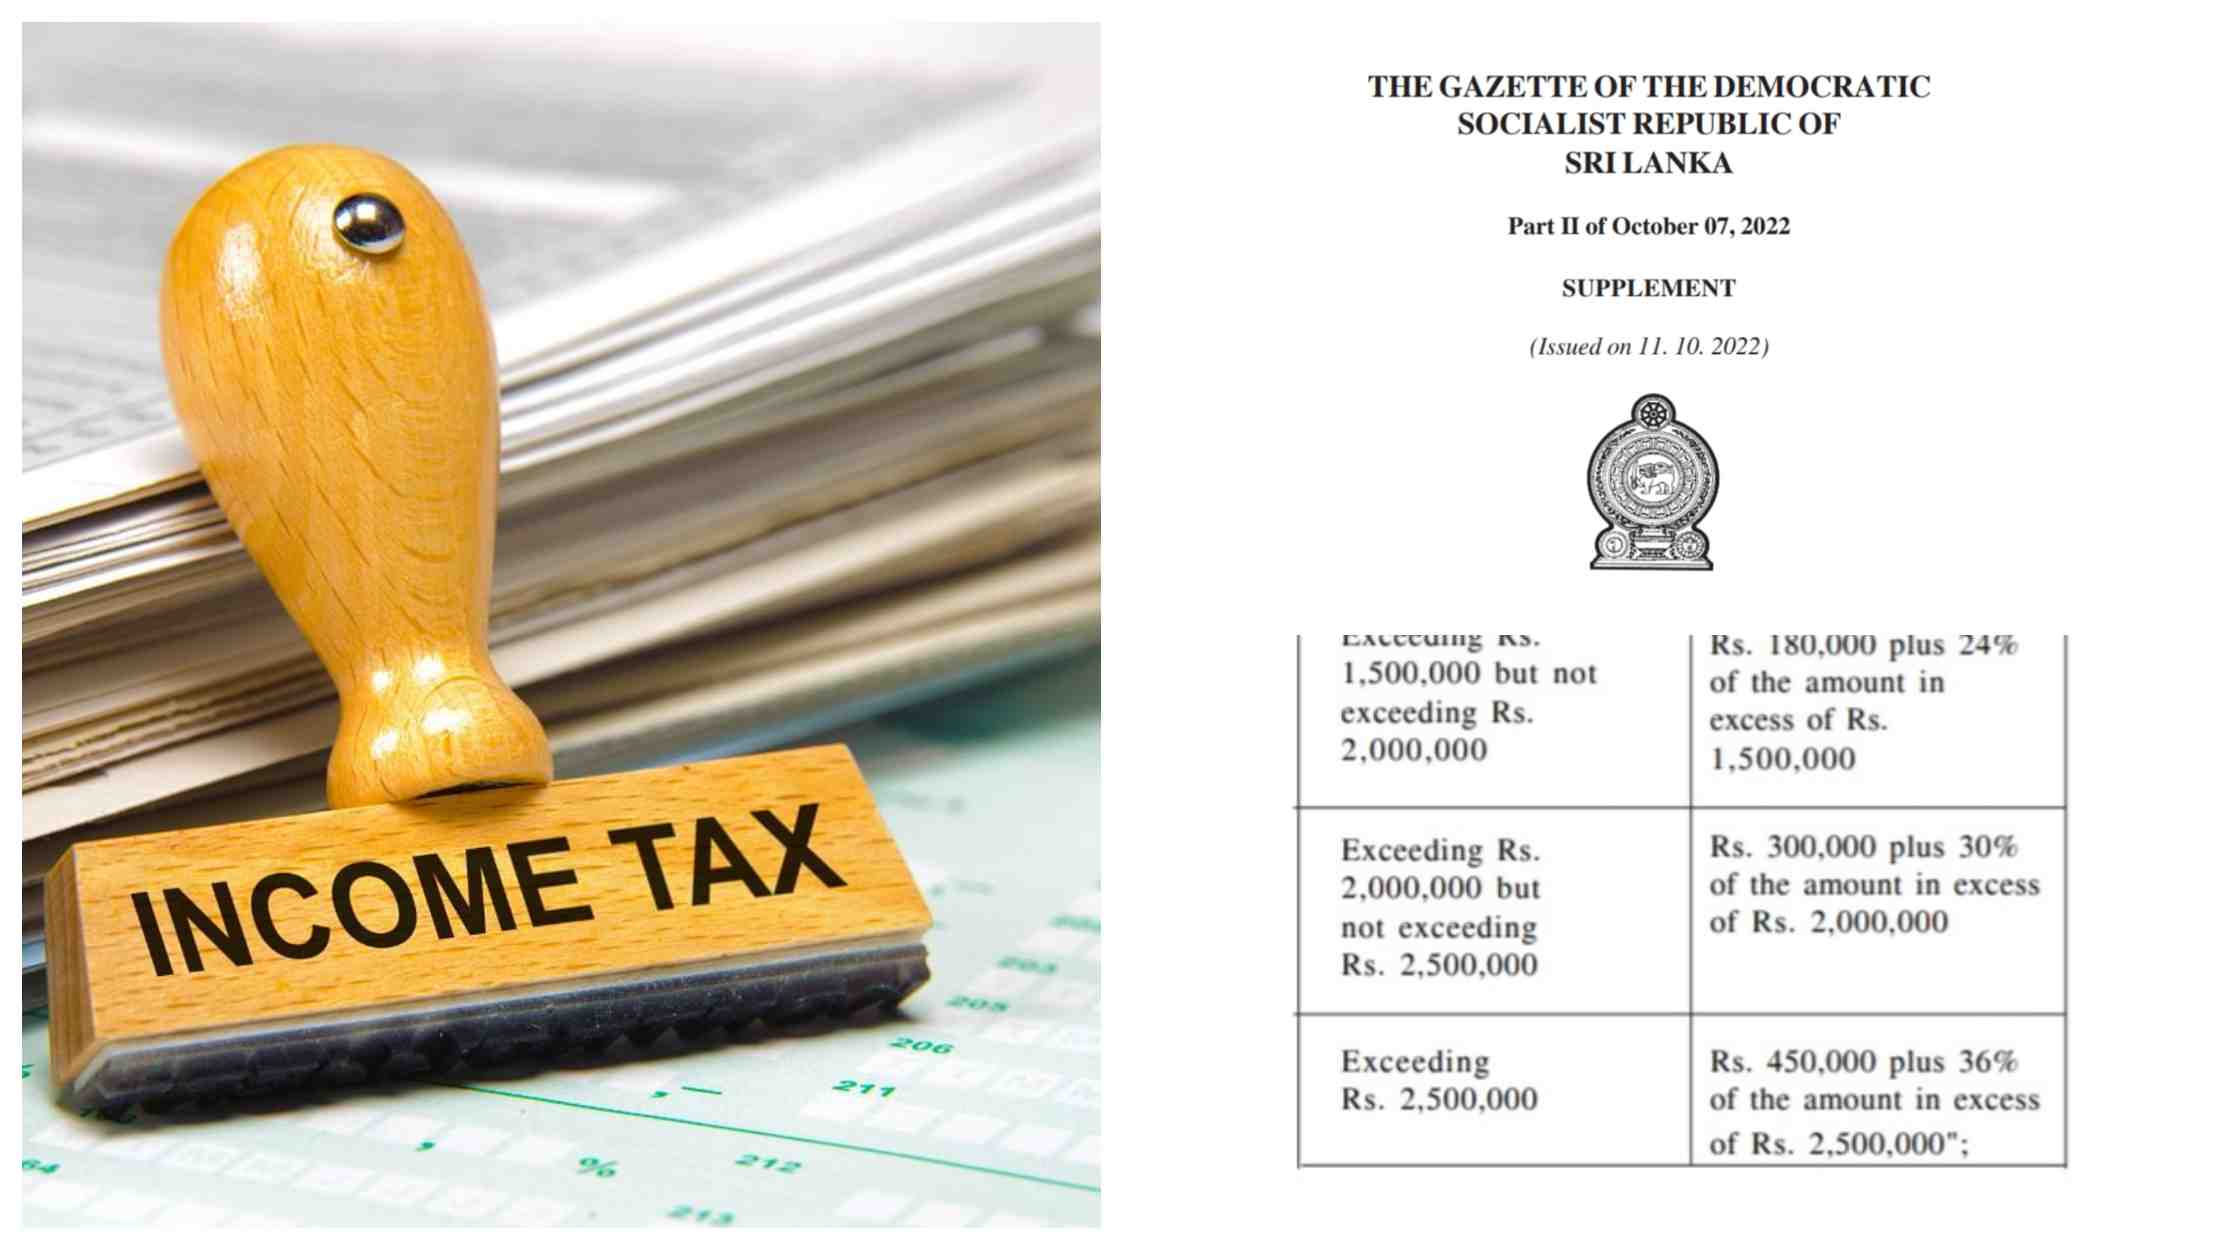 income-tax-alert-amended-gazette-issued-newswire